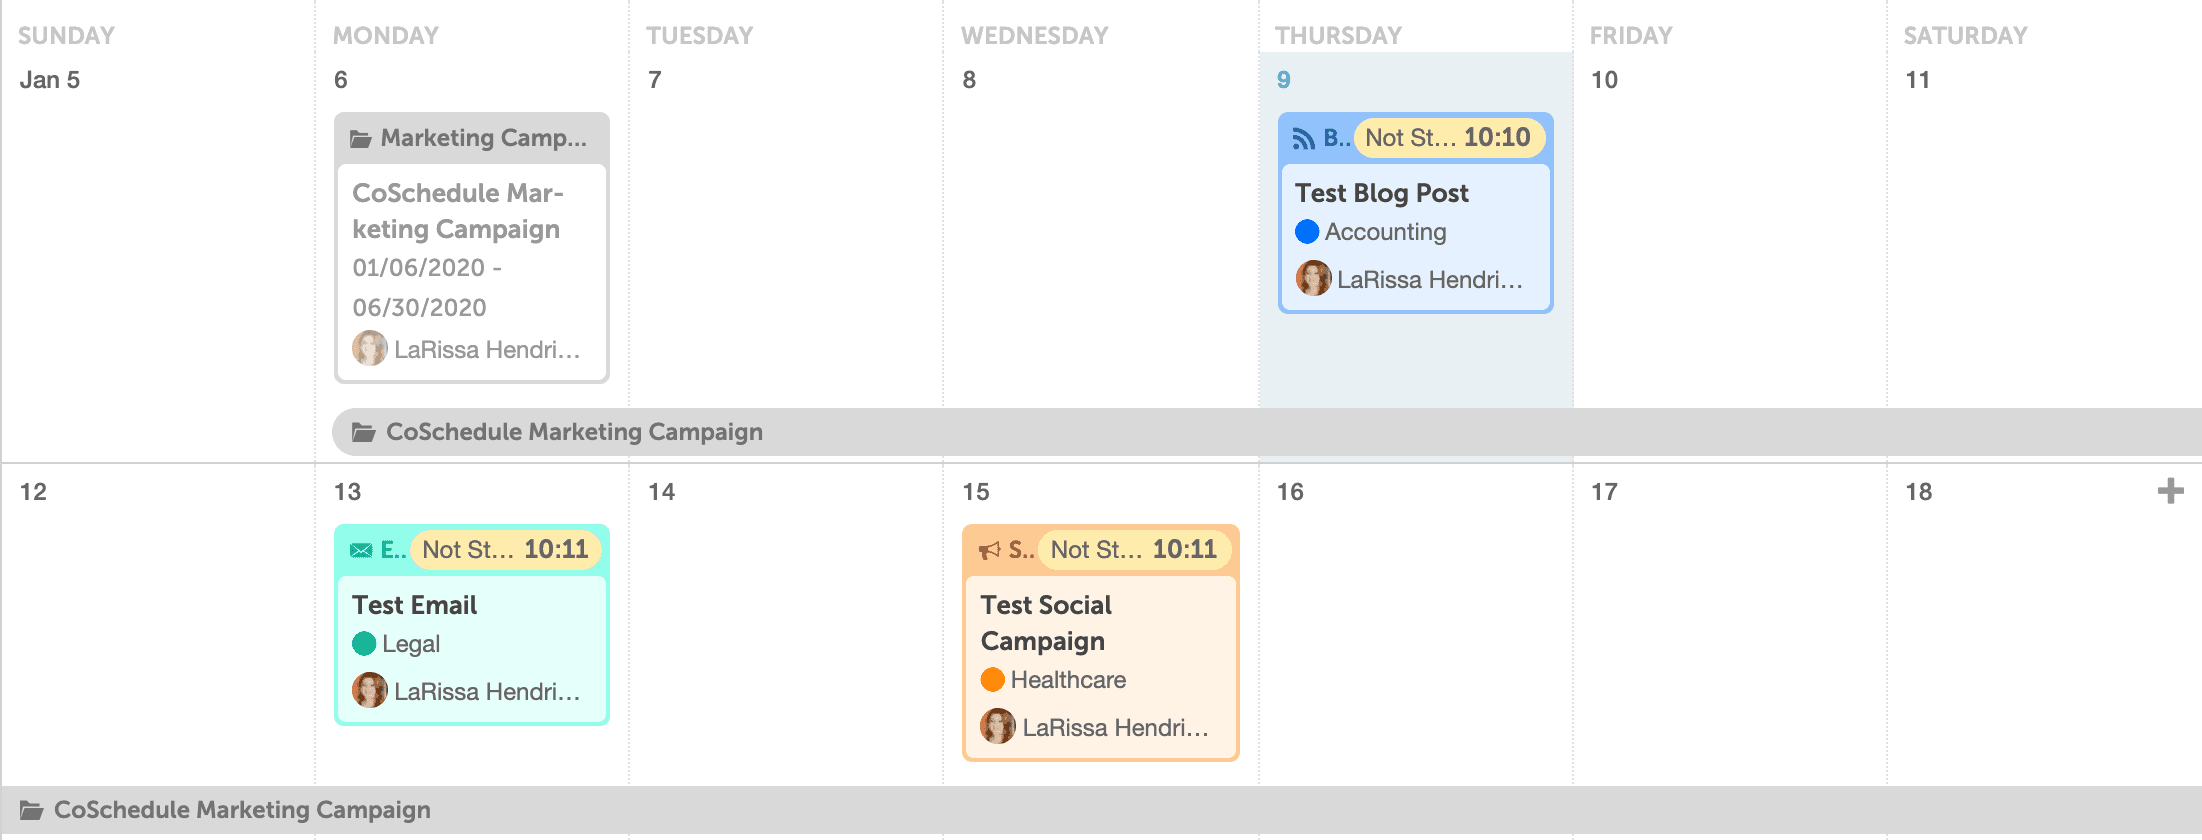 Projects On CoSchedule Calendar